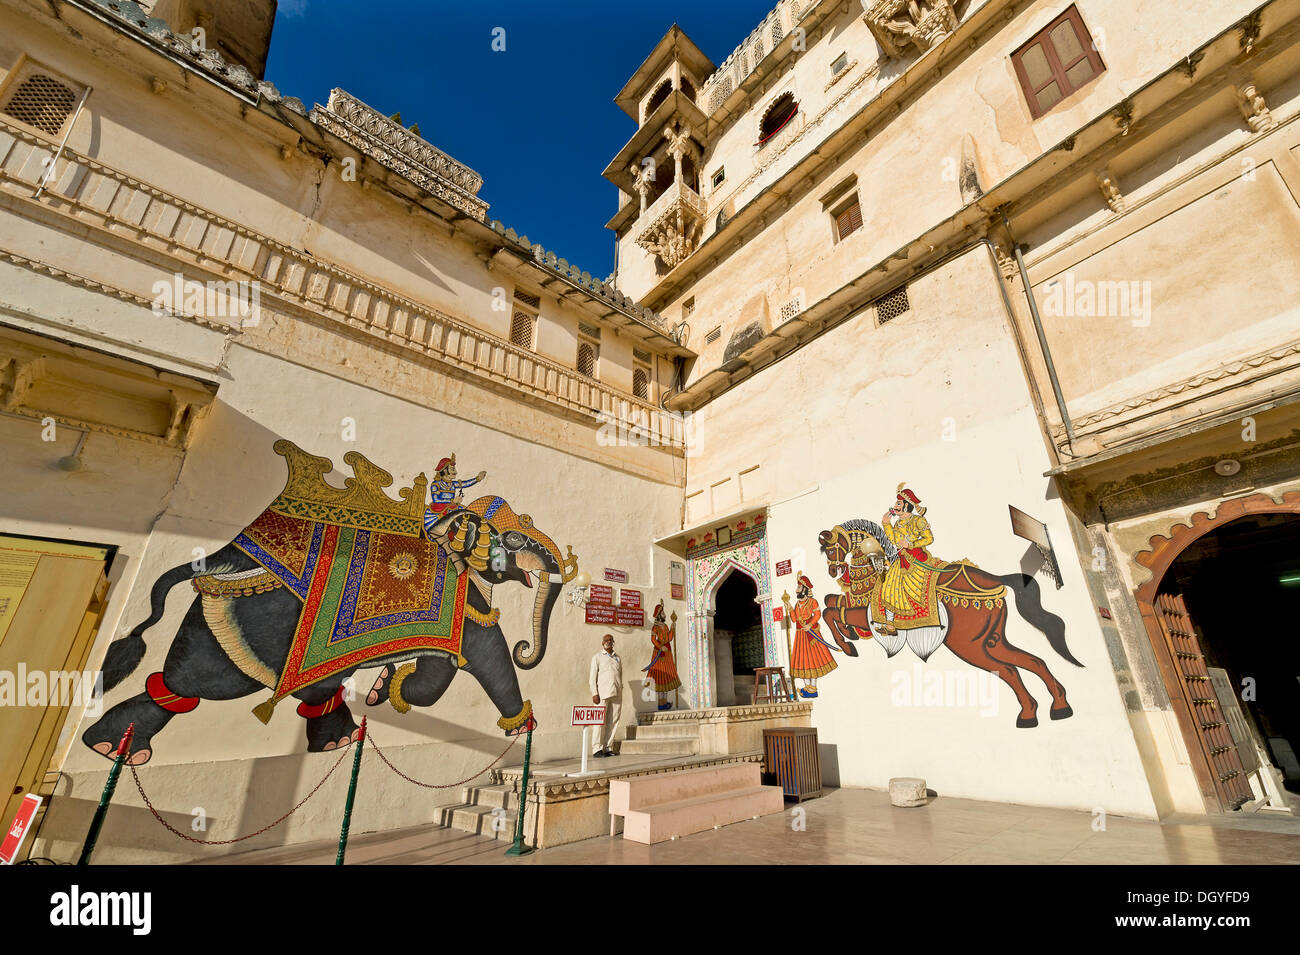 Visitor entrance to the City Palace of the Maharana of Udaipur, with painted walls, Udaipur, Rajasthan, India Stock Photo